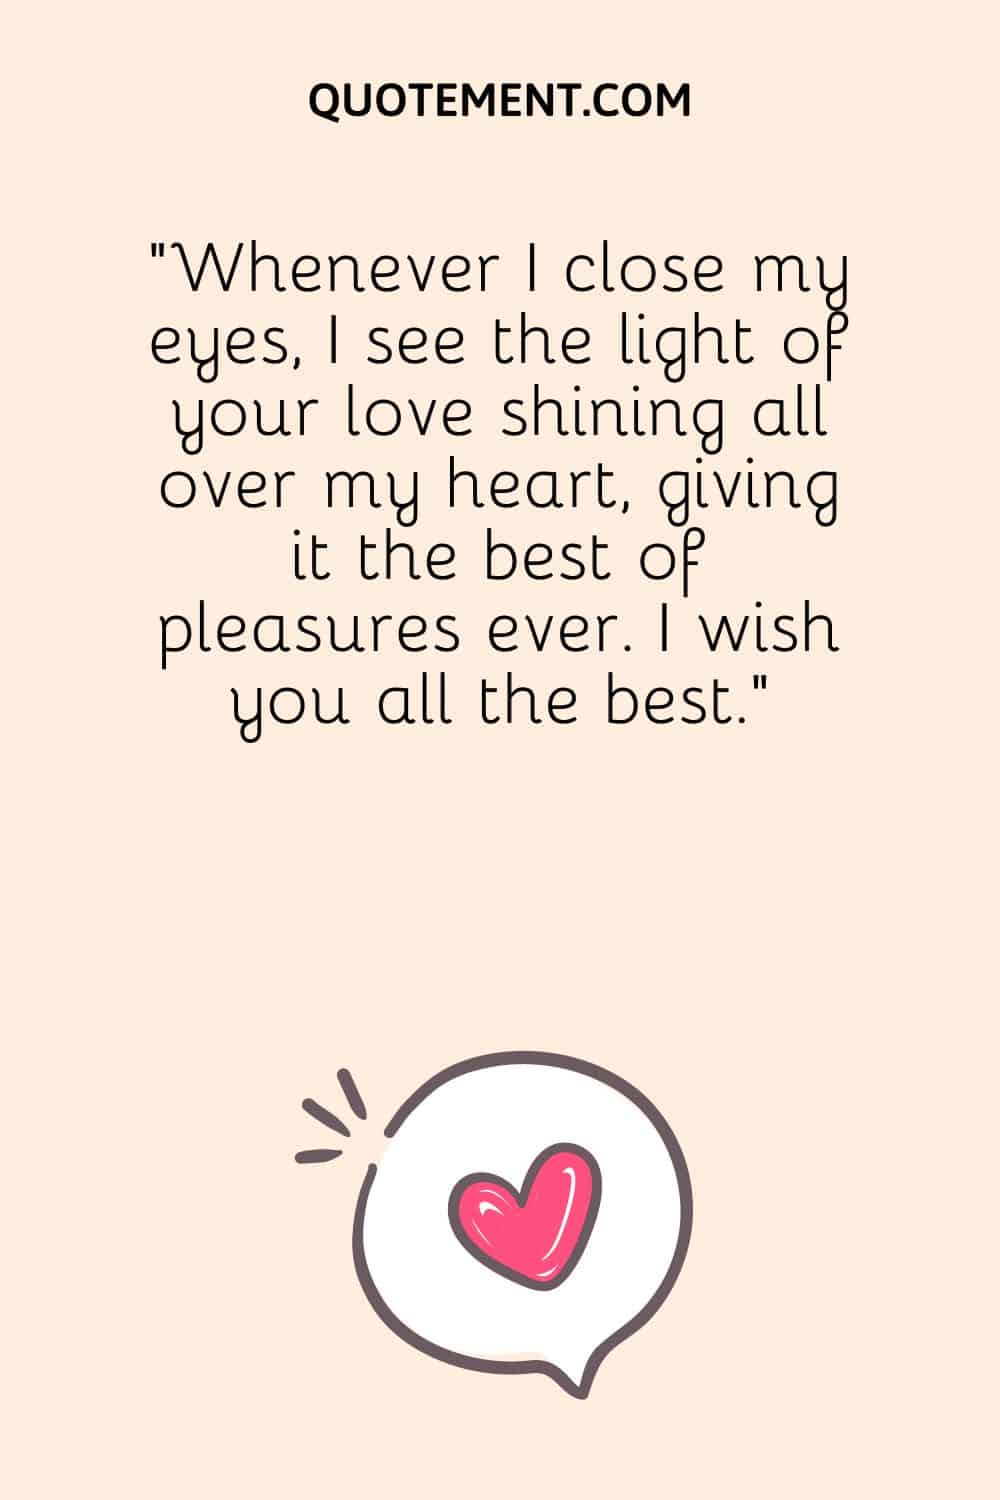 Whenever I close my eyes, I see the light of your love shining all over my heart, giving it the best of pleasures ever